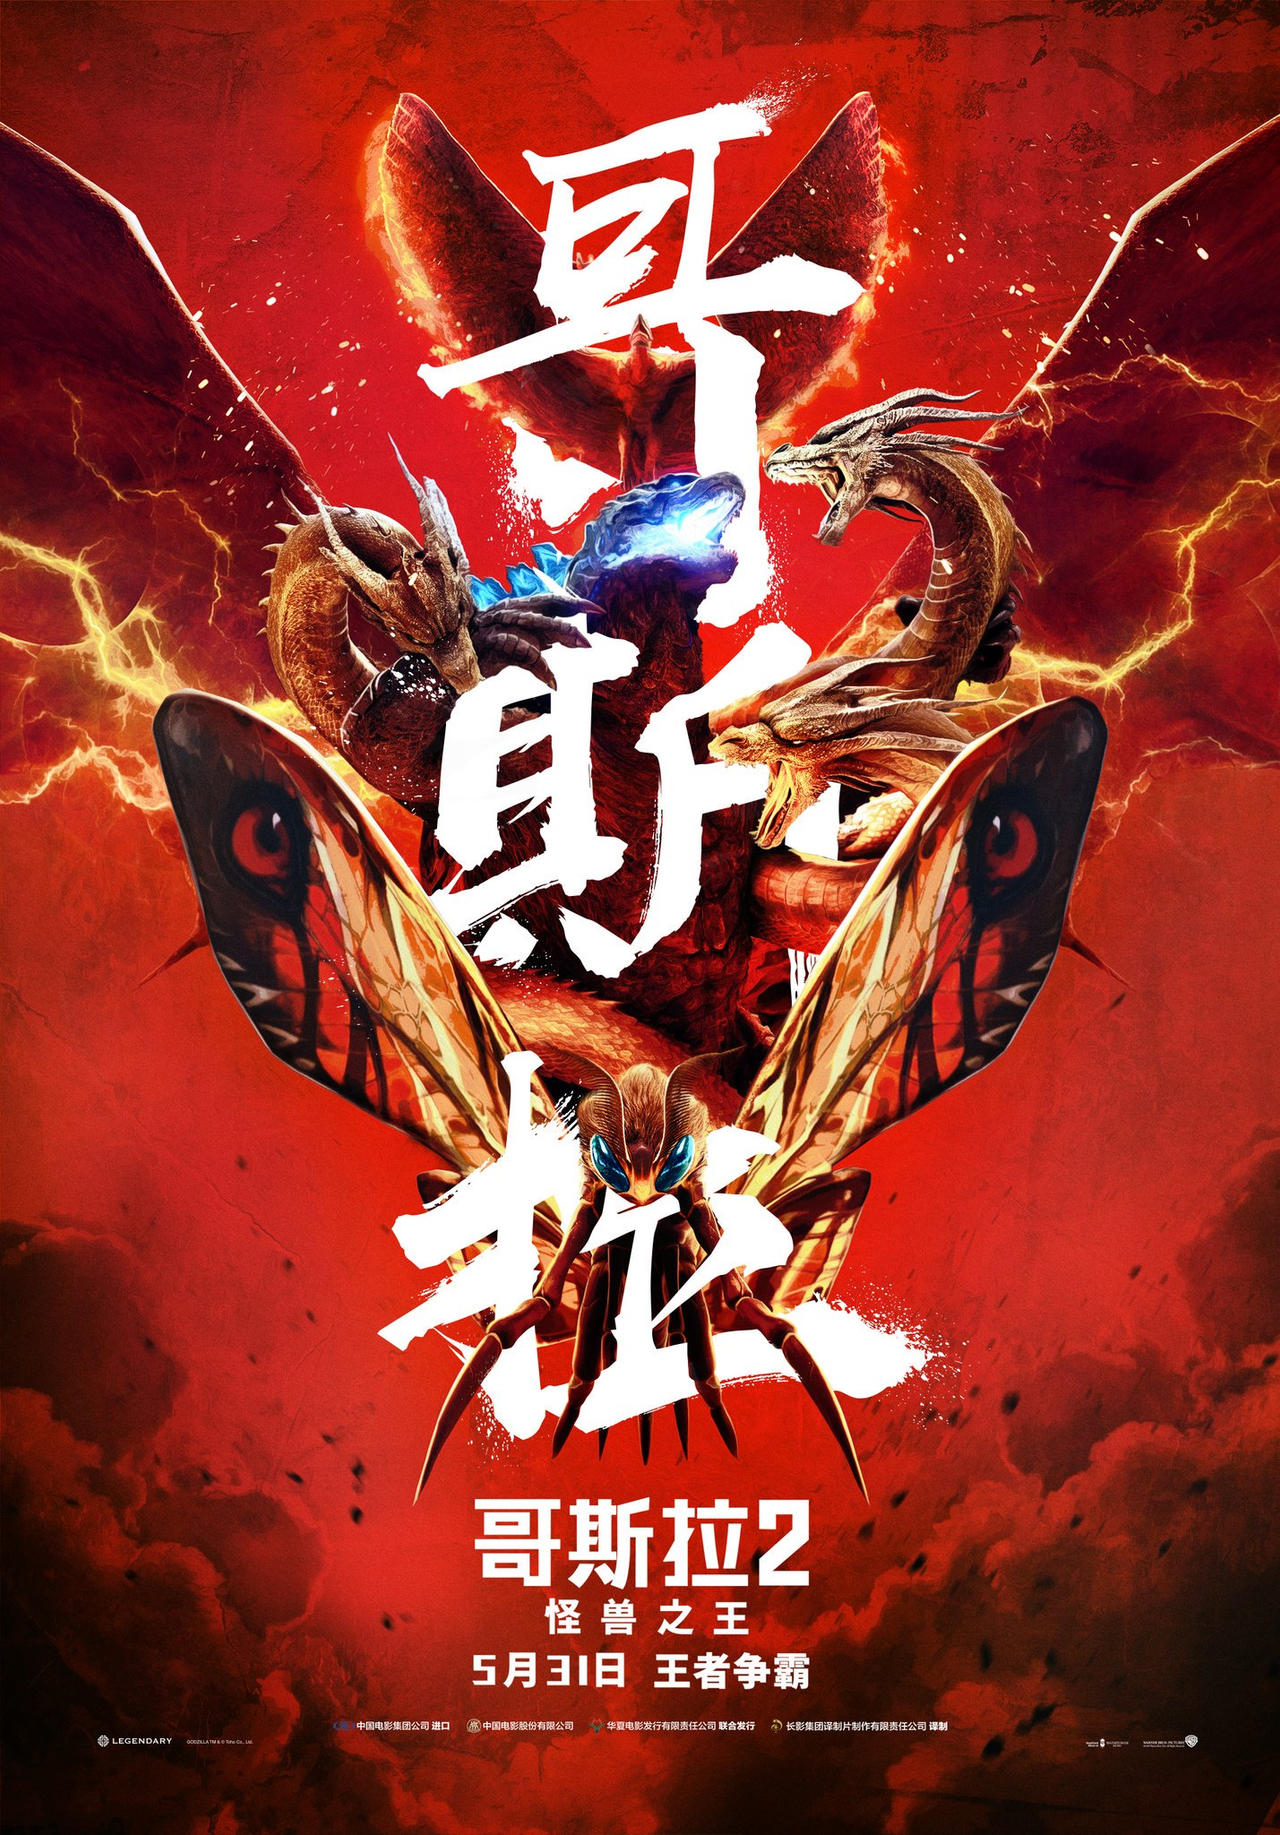 Epic Godzilla King Of The Monsters Chinese Poster By Darthraptor97 On Deviantart